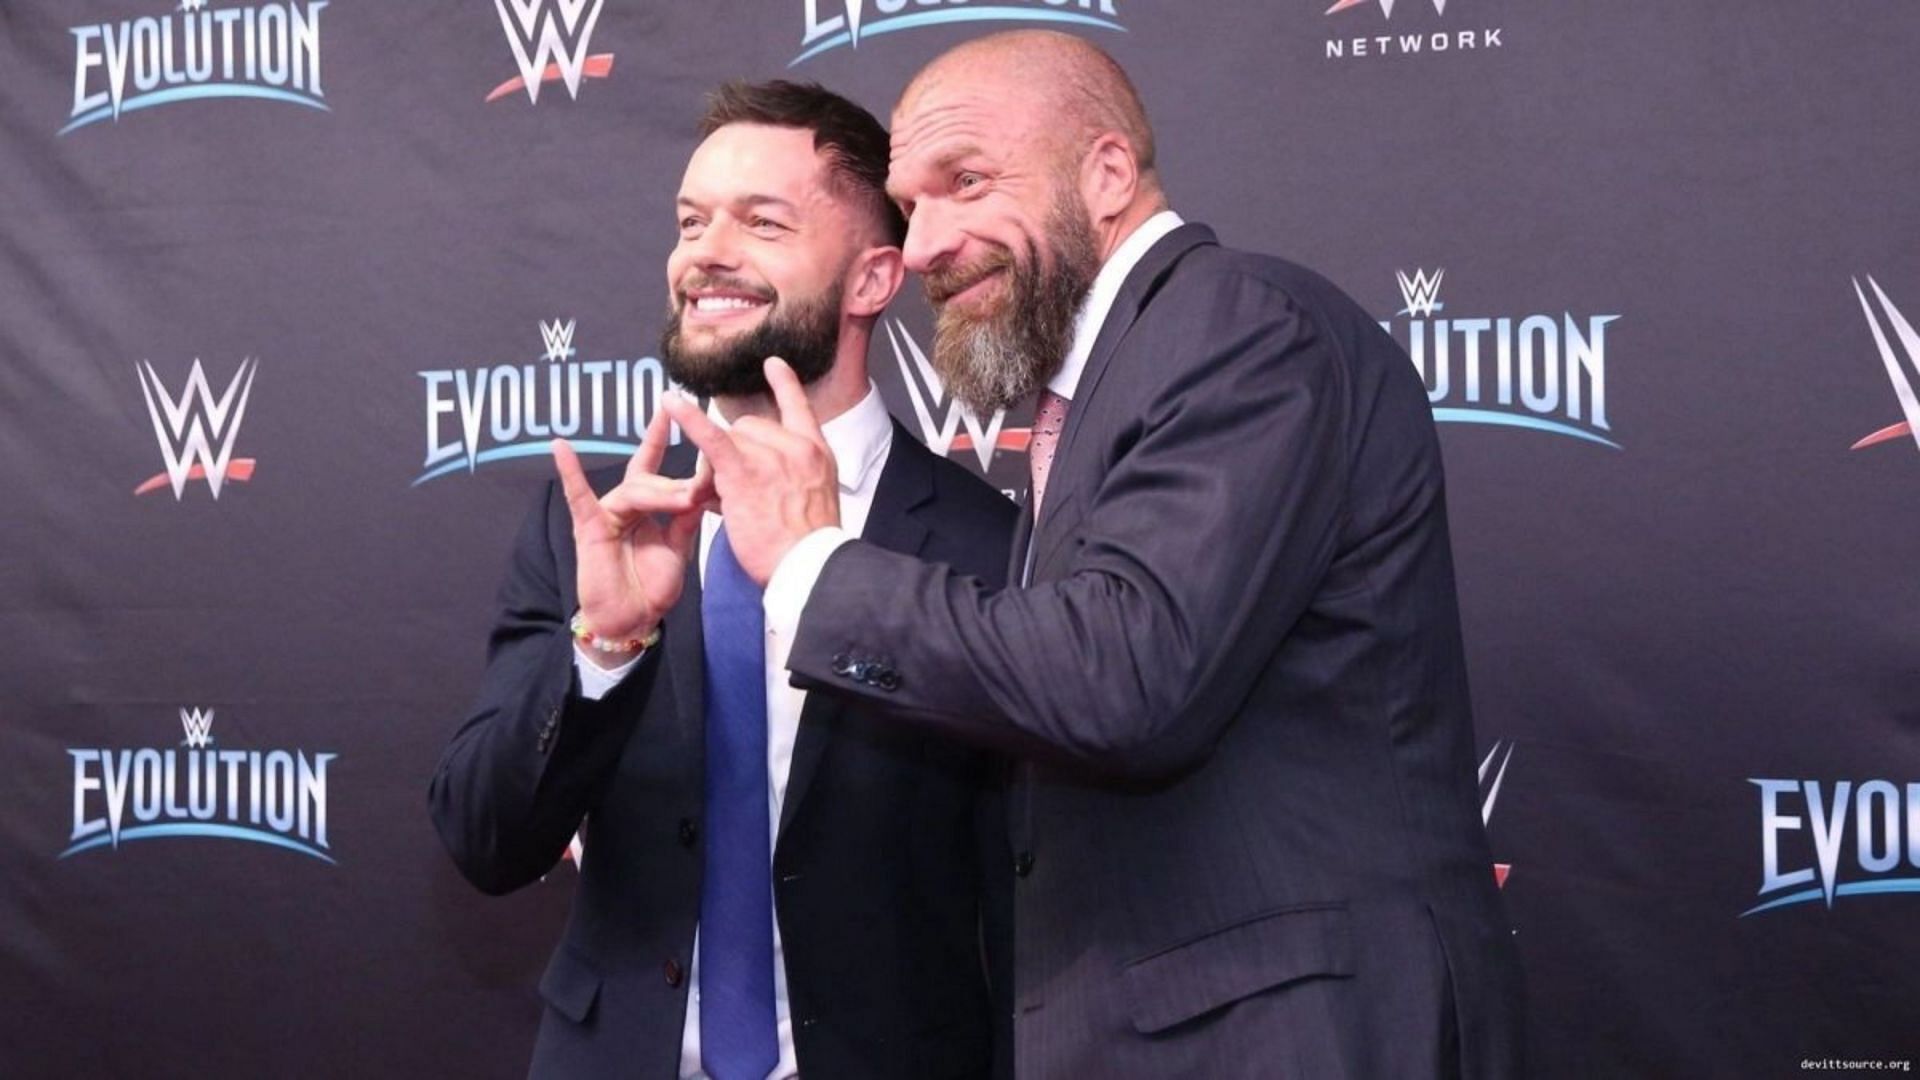 Finn Balor and Triple H are friends